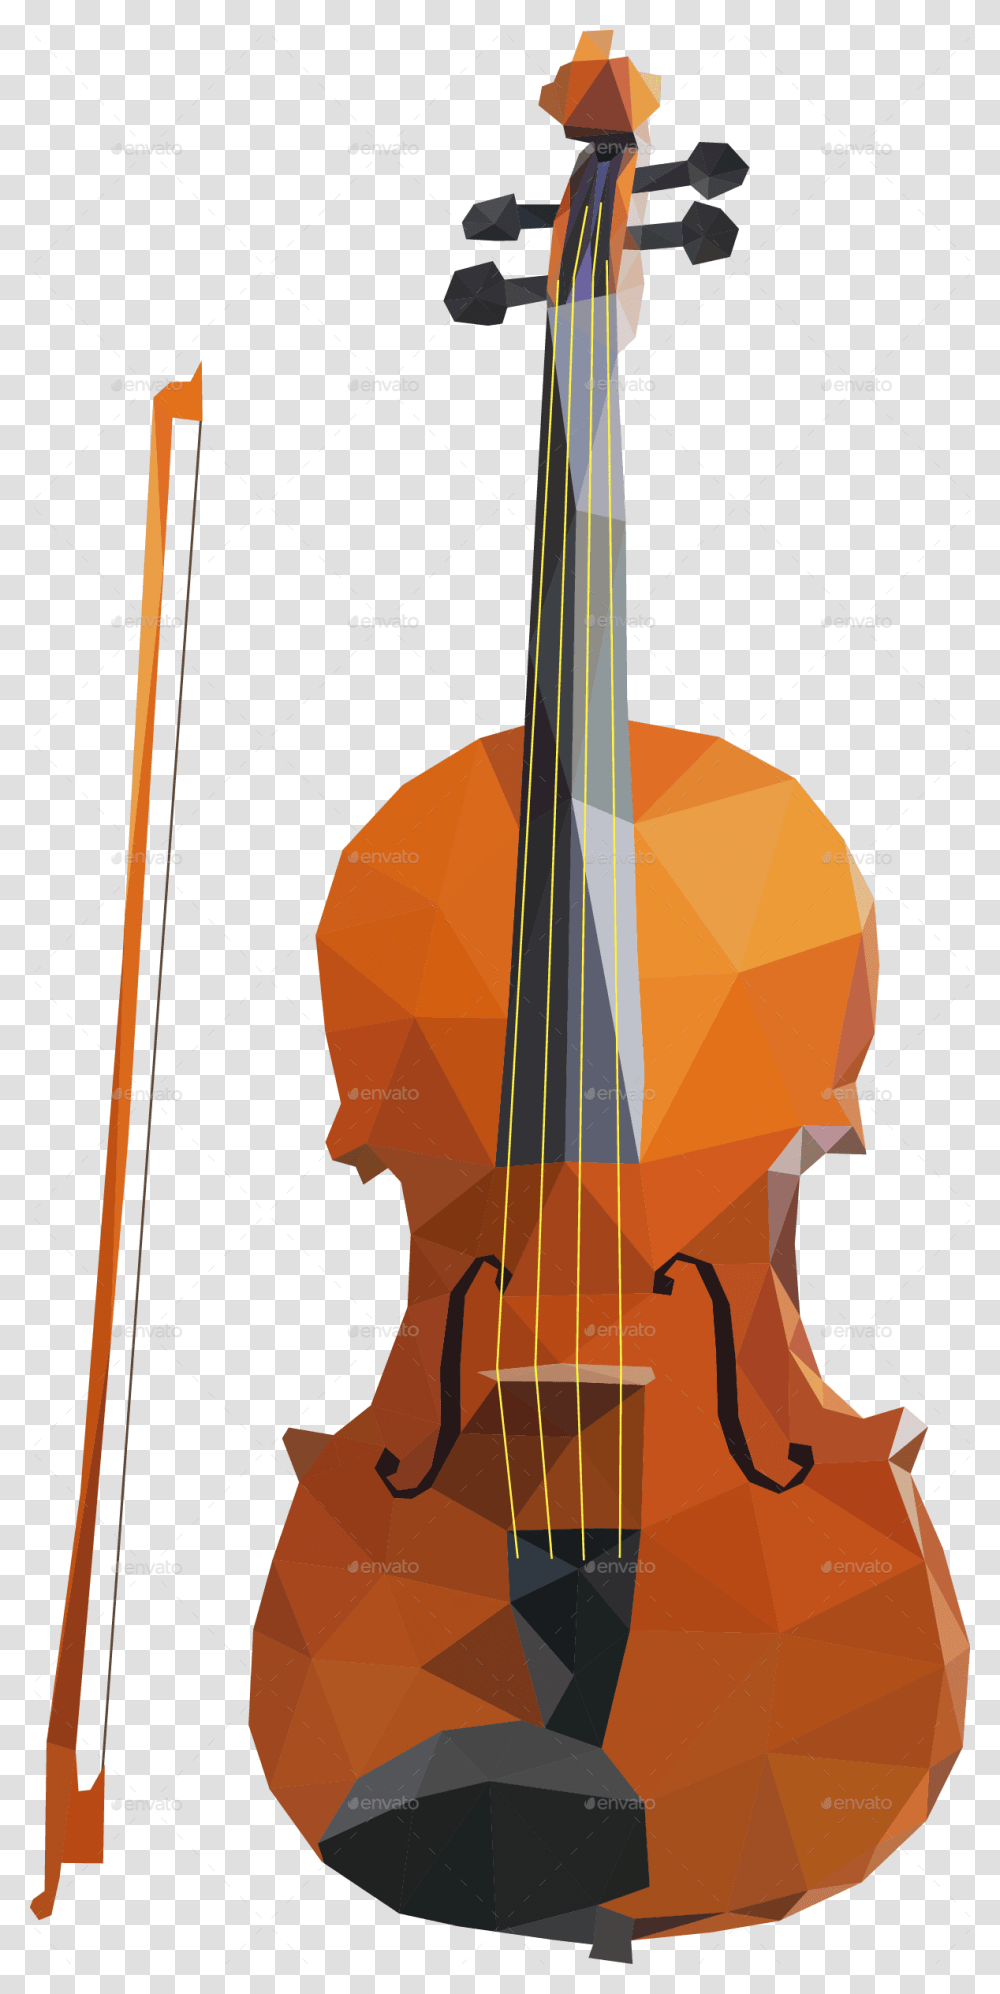 Violin Music Instruments Low Poly Art Kiti Profile Low Poly Violin, Musical Instrument, Leisure Activities, Cello, Fiddle Transparent Png